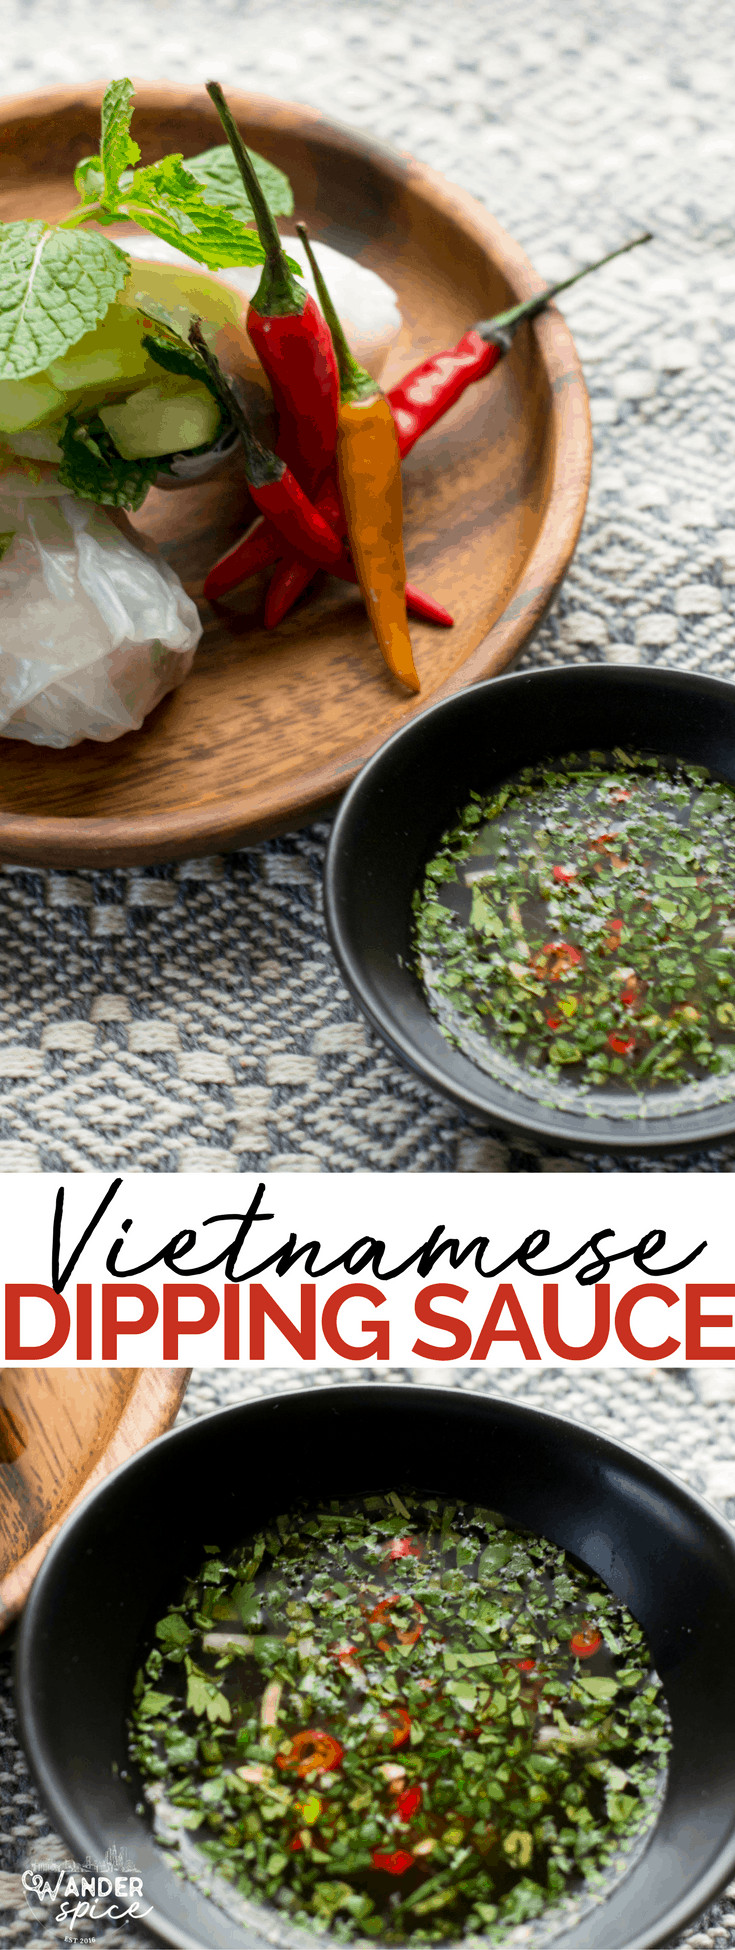 Nước chấm - vietnamese dipping sauce with lime, coconut water, chiles and cilantro